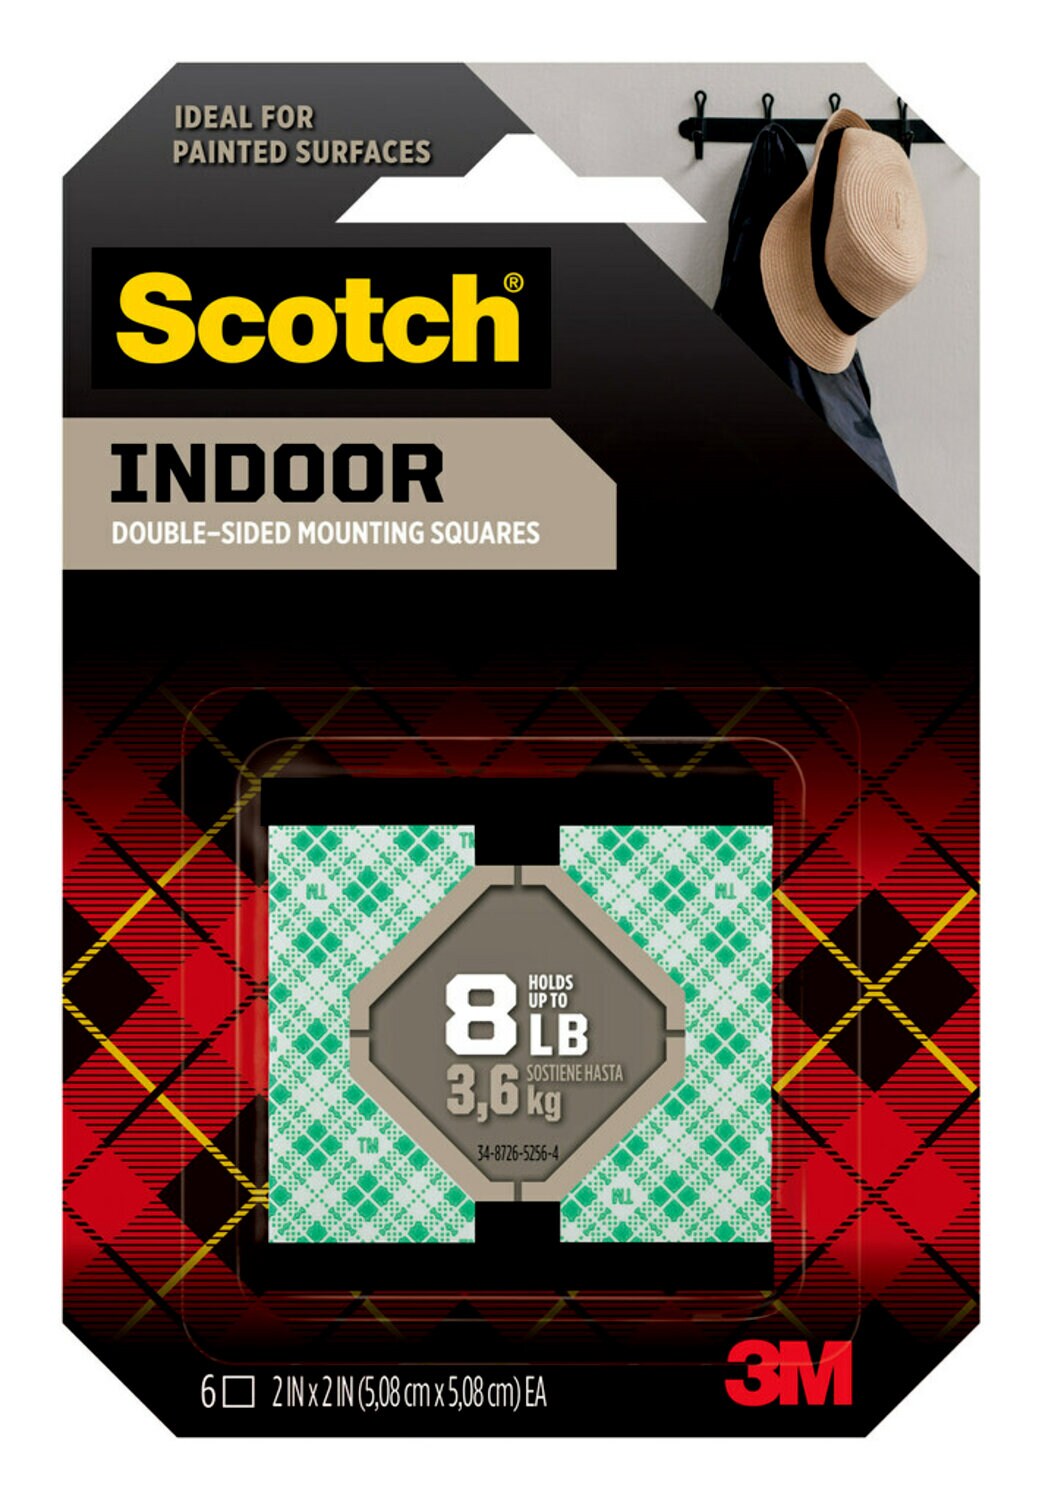 7100241755 - Scotch Indoor Double-Sided Mounting Squares 111S-SQLRG-6, 2 in x 2 in (5.08 cm x 5.08 cm) 6/pk